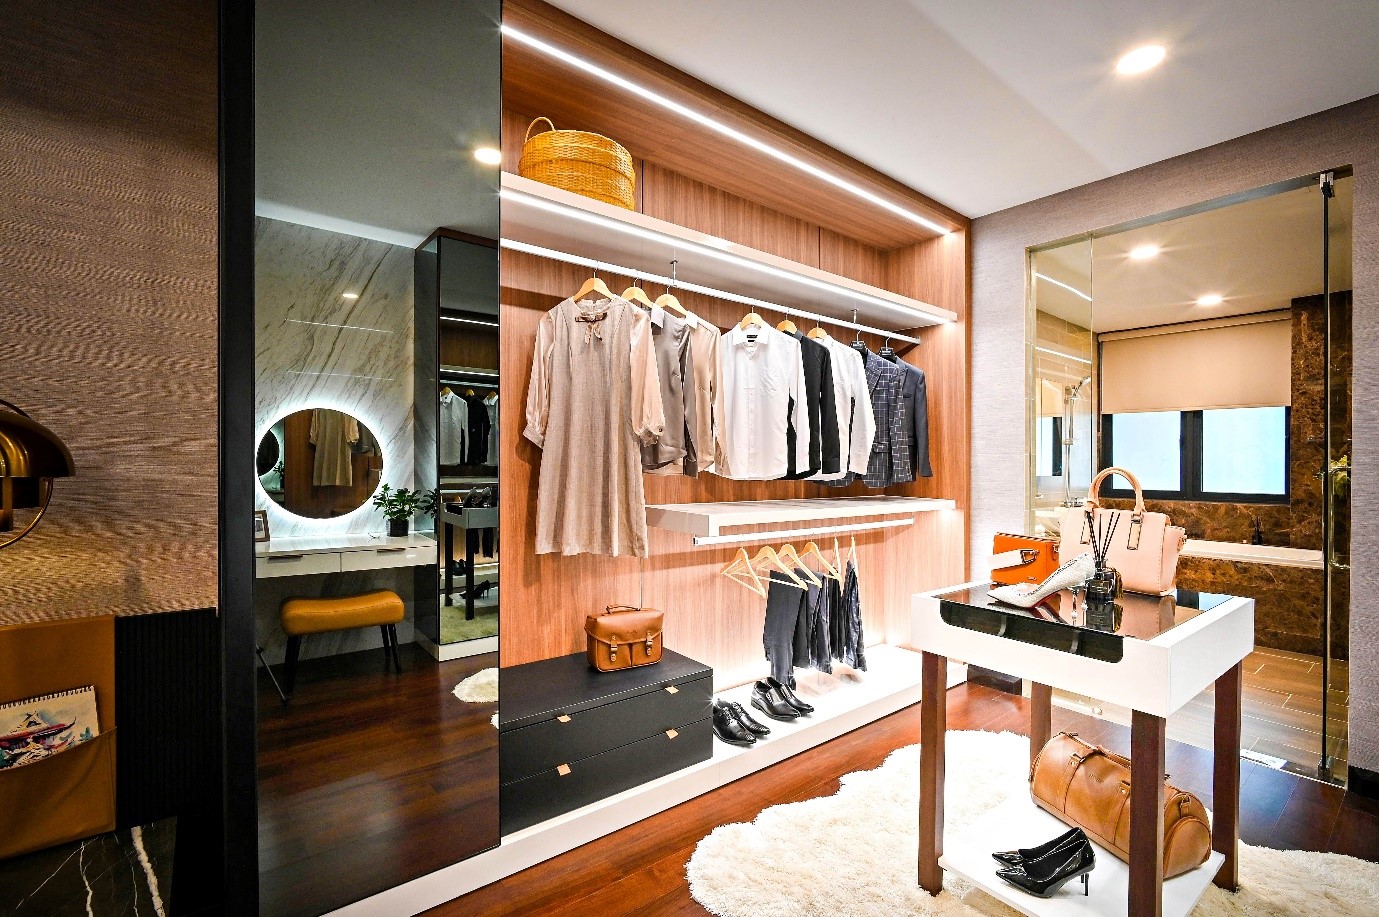 Wardrobe design to maximise style and space with dressing table - Times  property